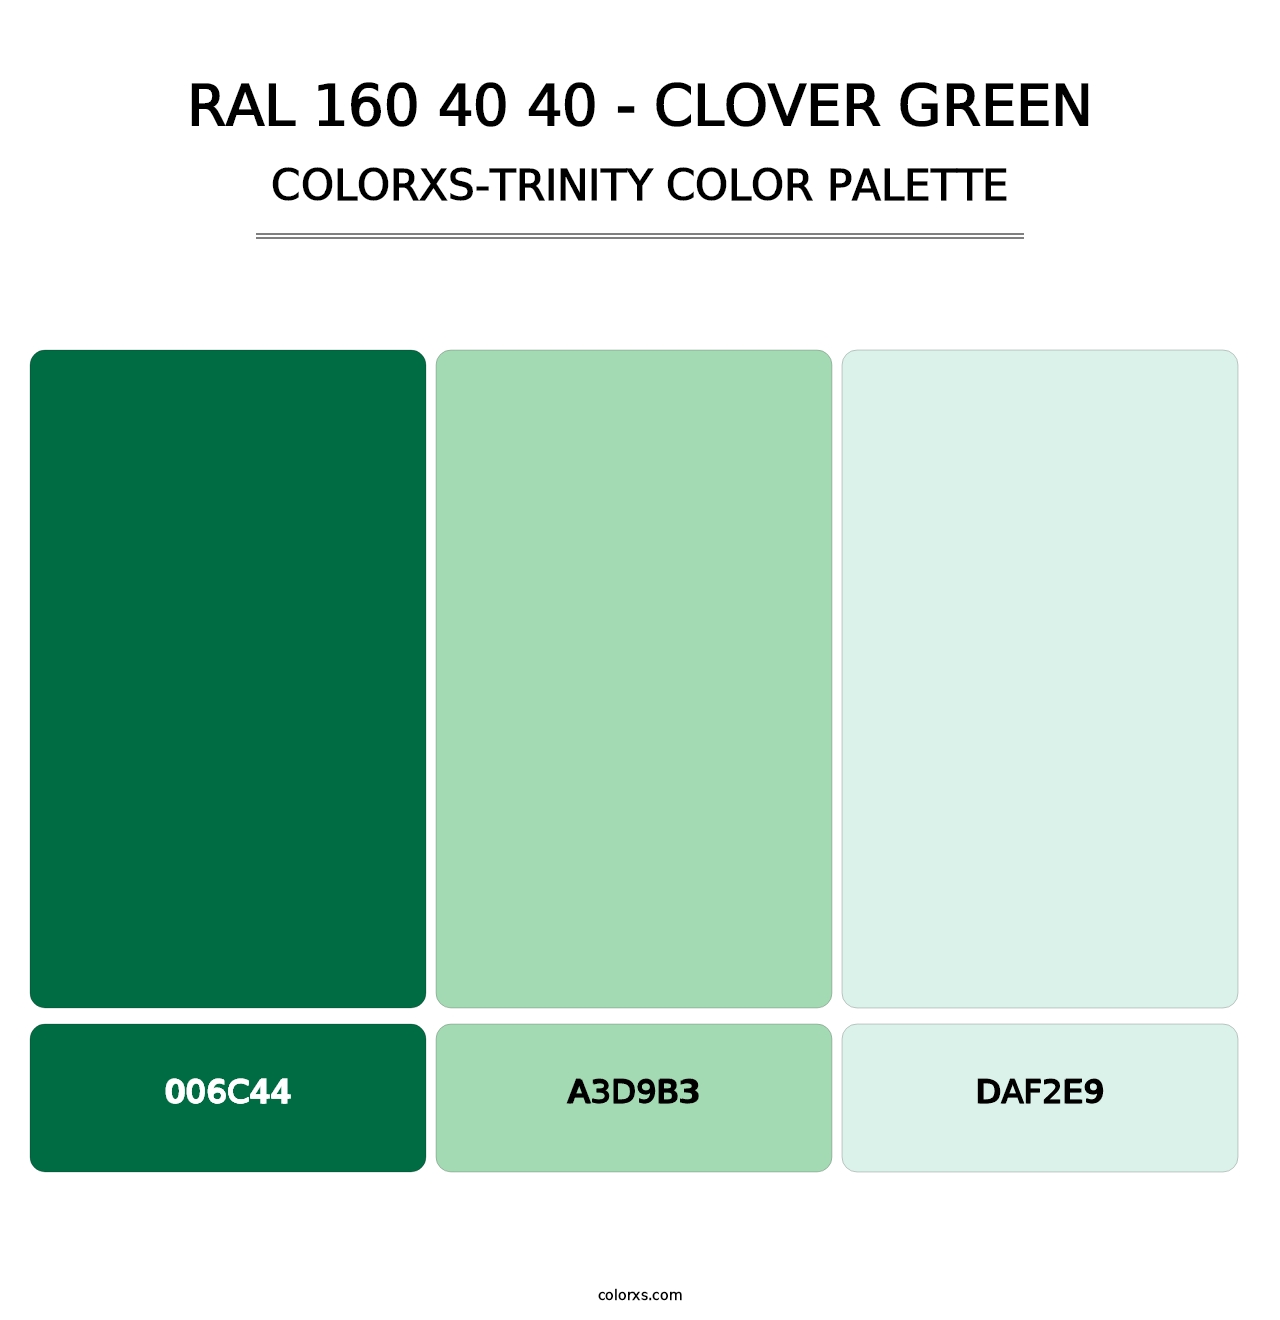 RAL 160 40 40 - Clover Green - Colorxs Trinity Palette